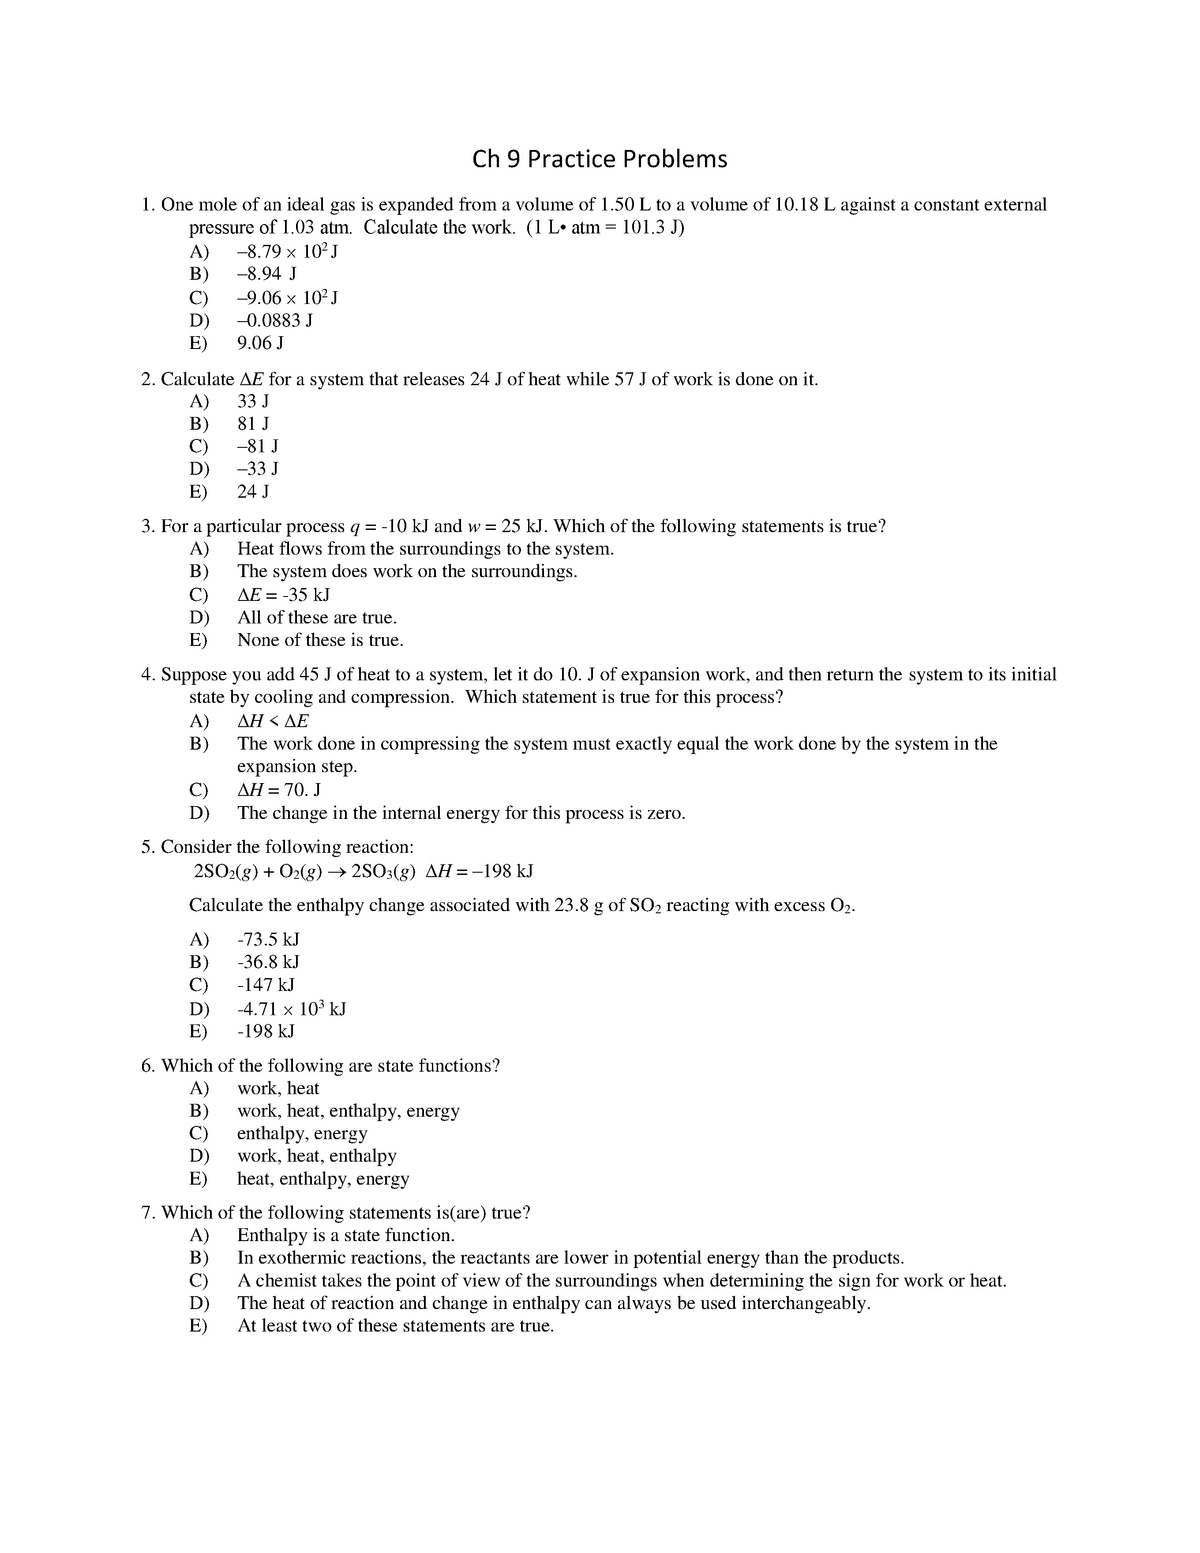 Chem 121 Chapter 9 practice test with answers Ch 9 Practice